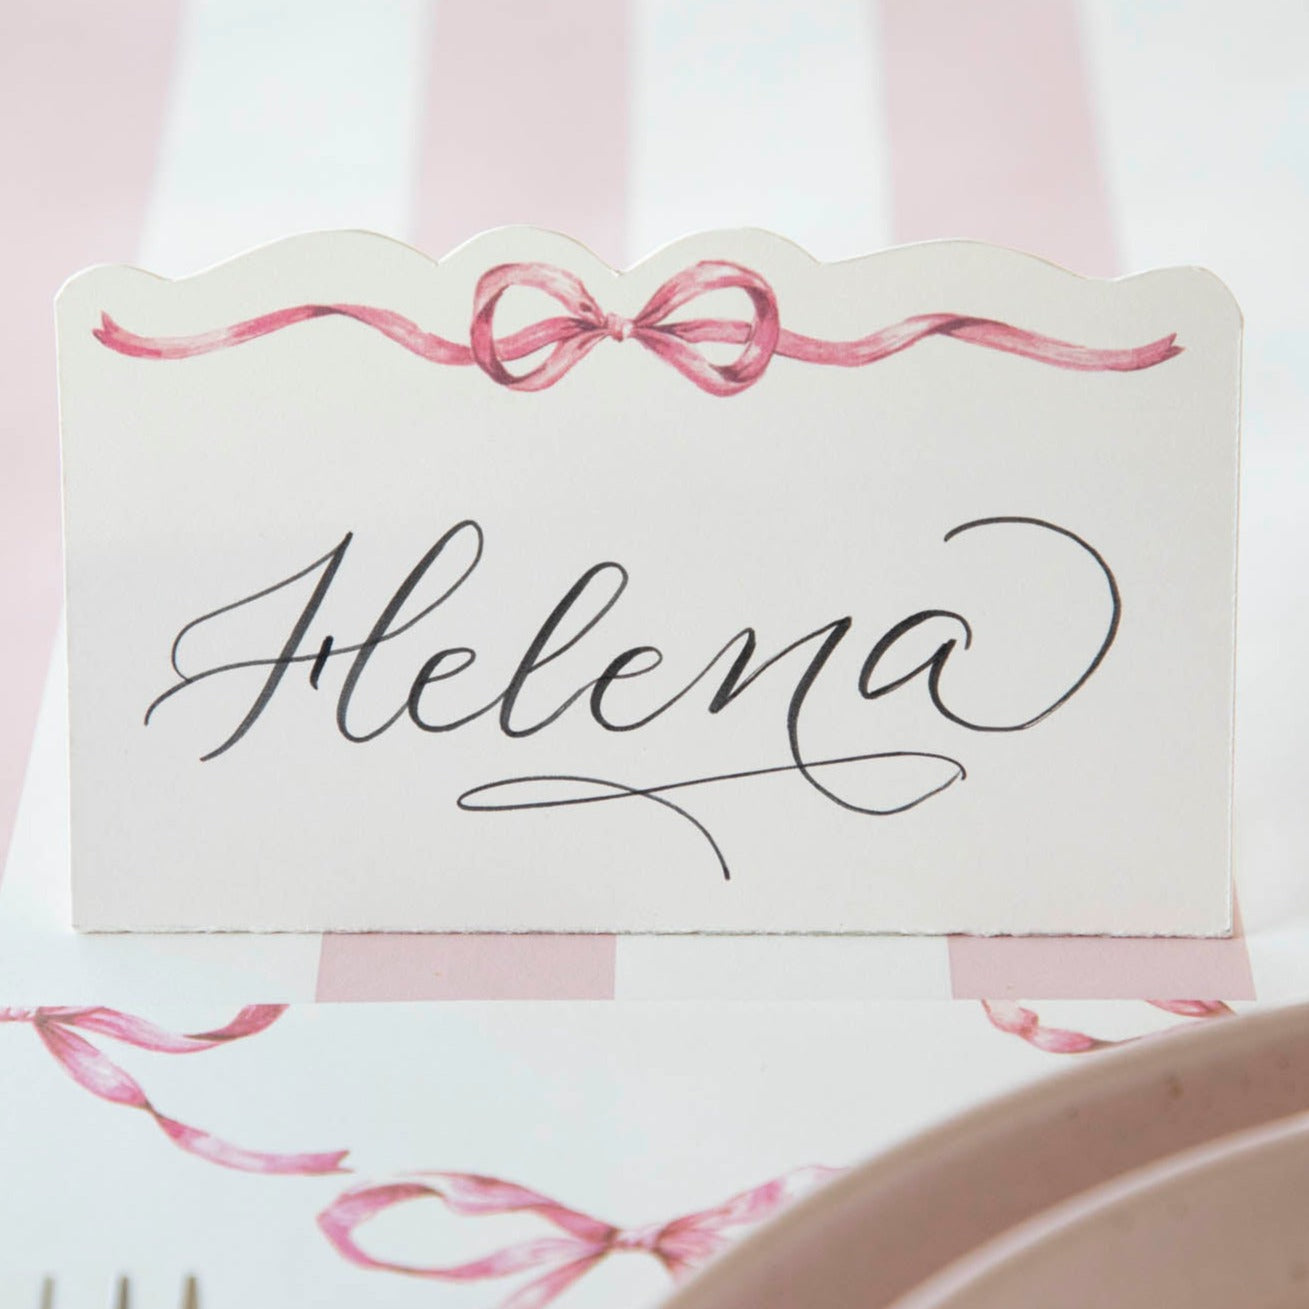 This Pink Bow Place Card, from Hester &amp; Cook, rests delicately on a table amidst dishes and exudes loveliness.